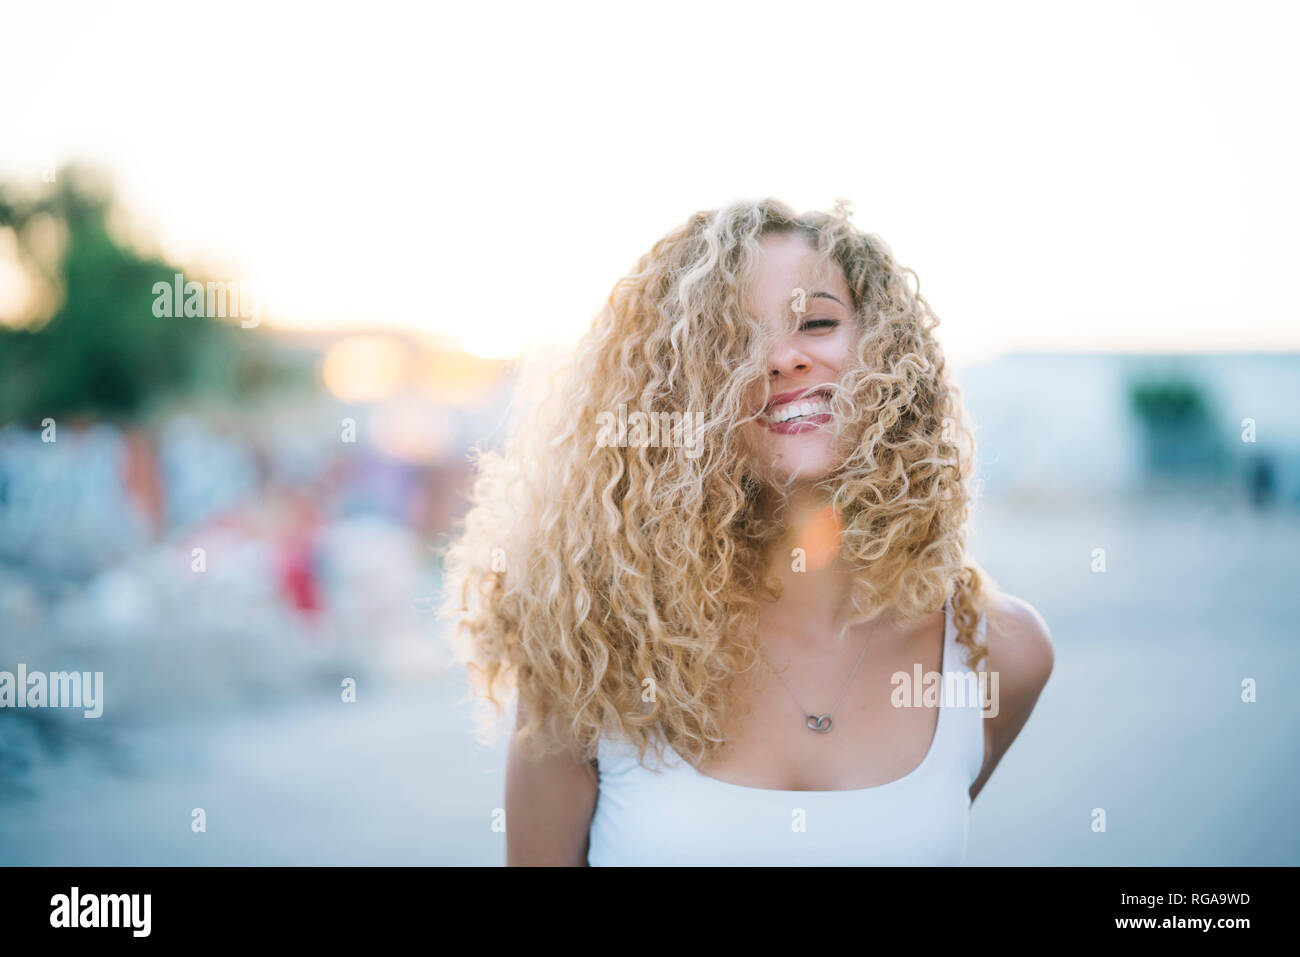 Portrait of happy young woman with blond ringlets Stock Photo